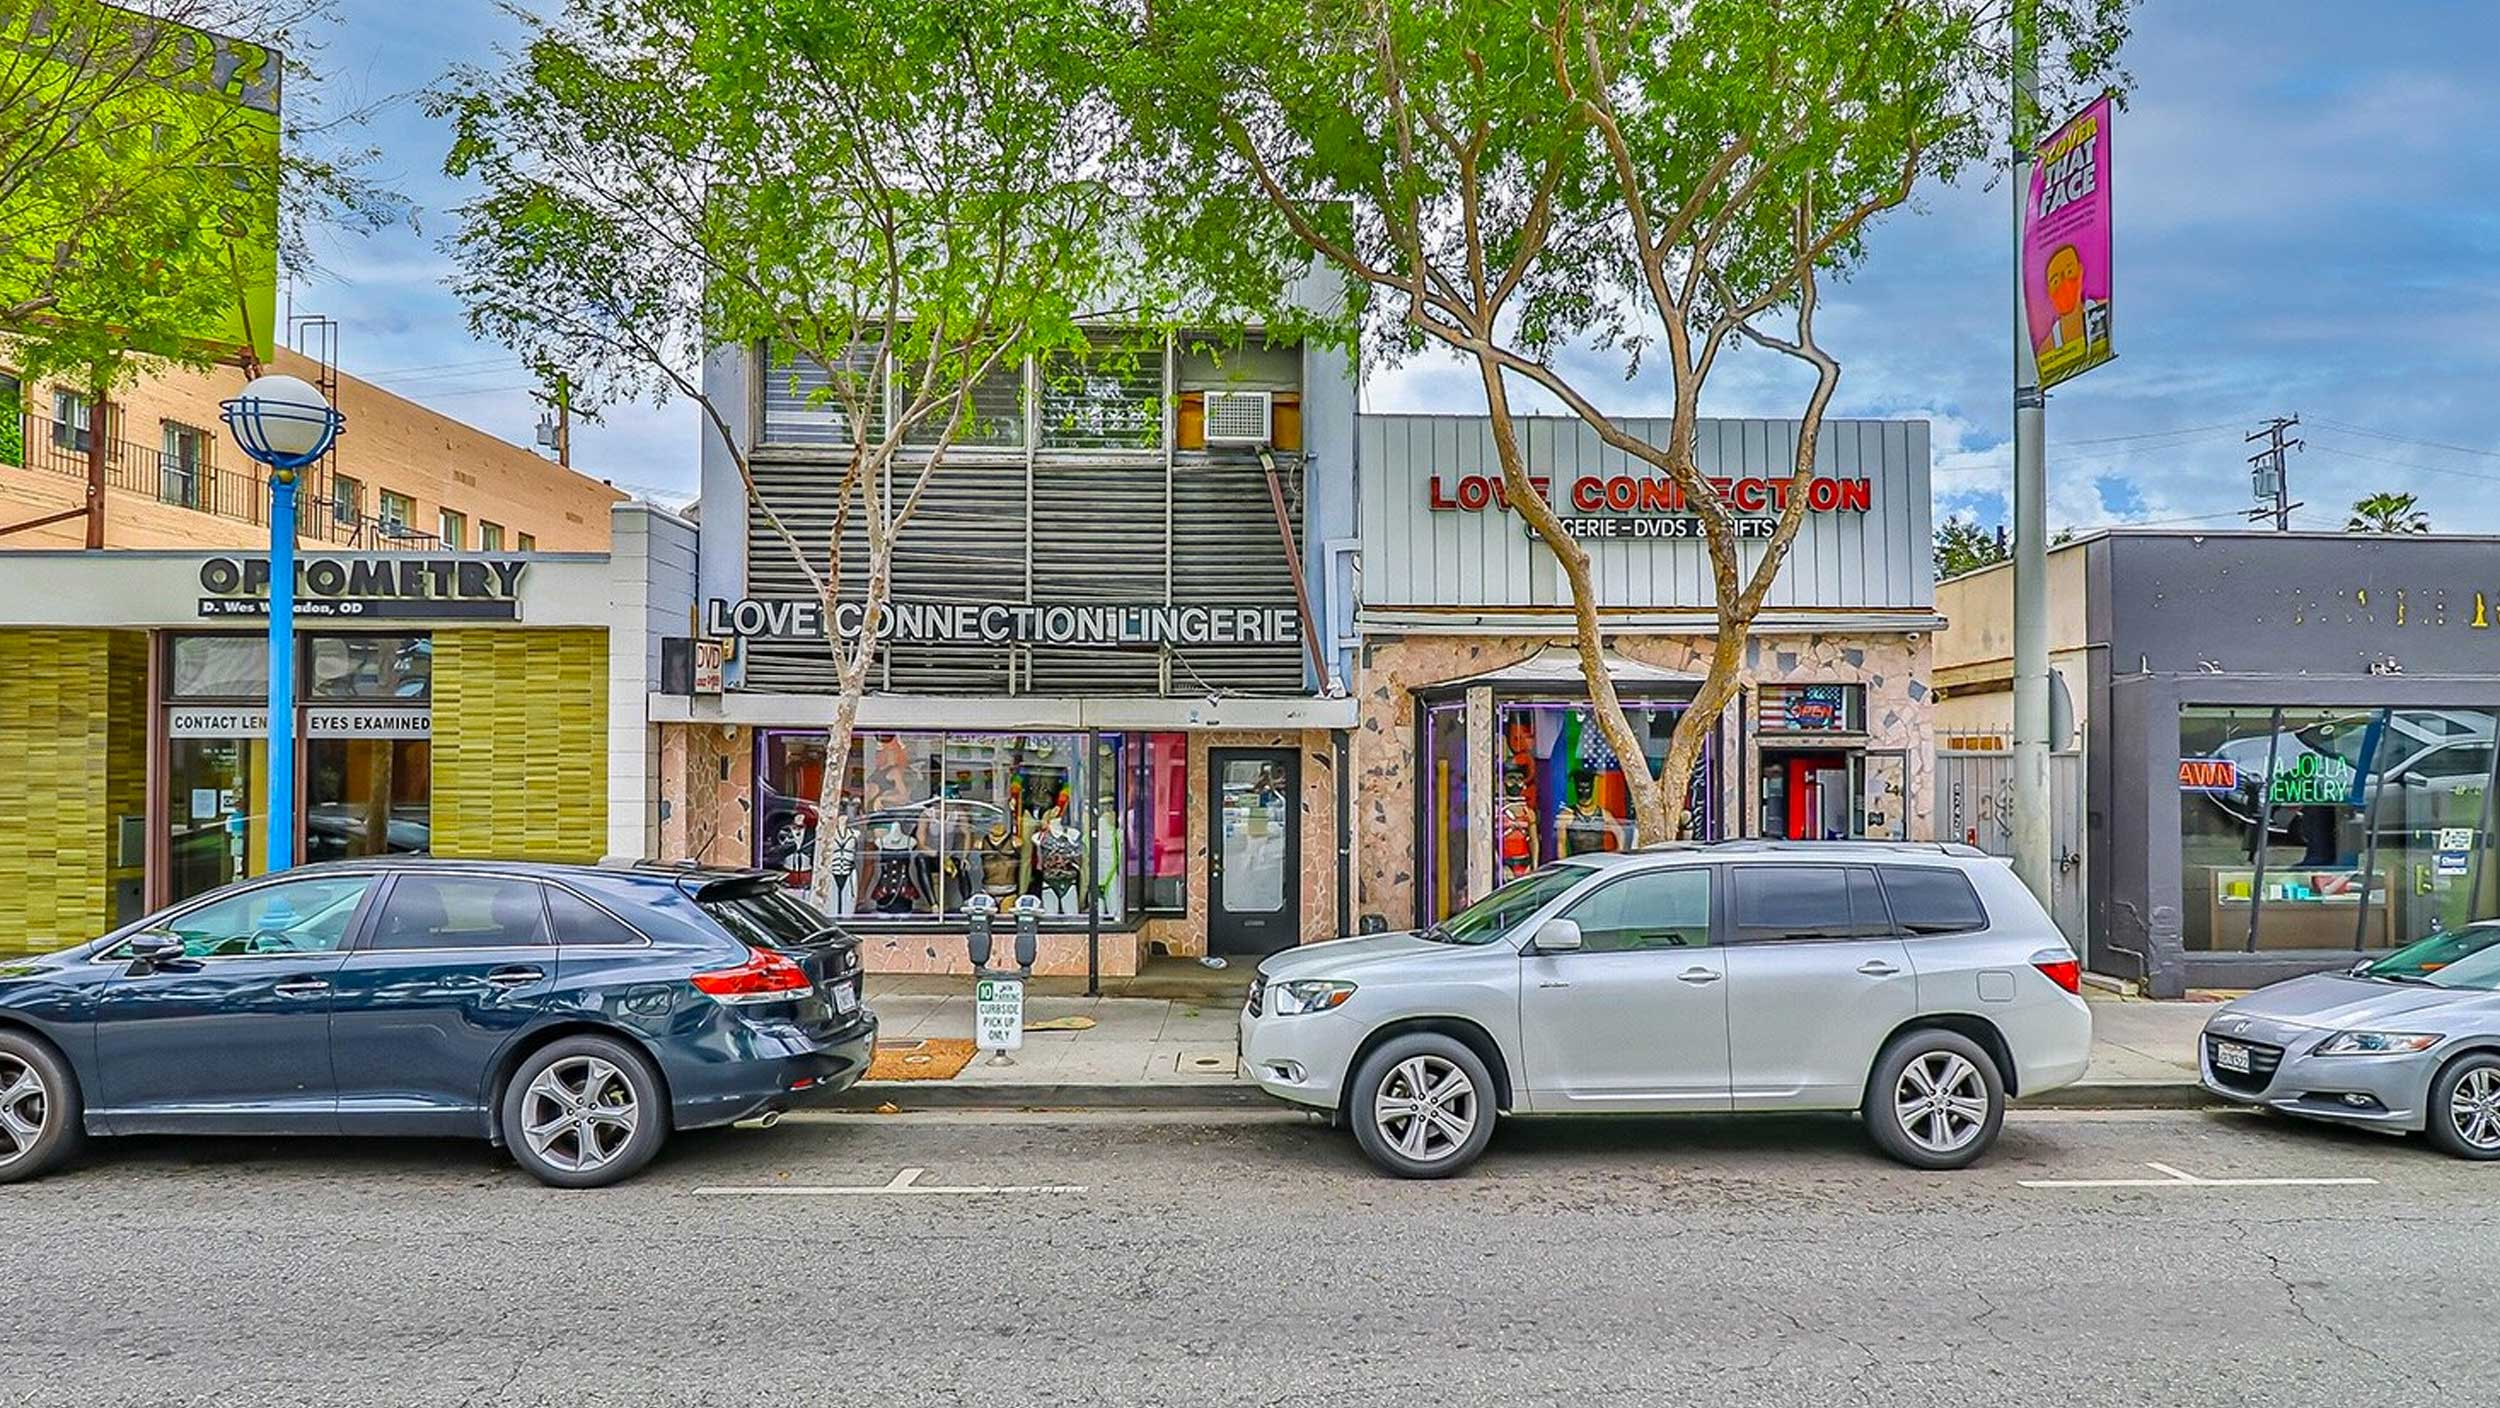 Vibrant storefronts with parked cars and green trees on a city street.